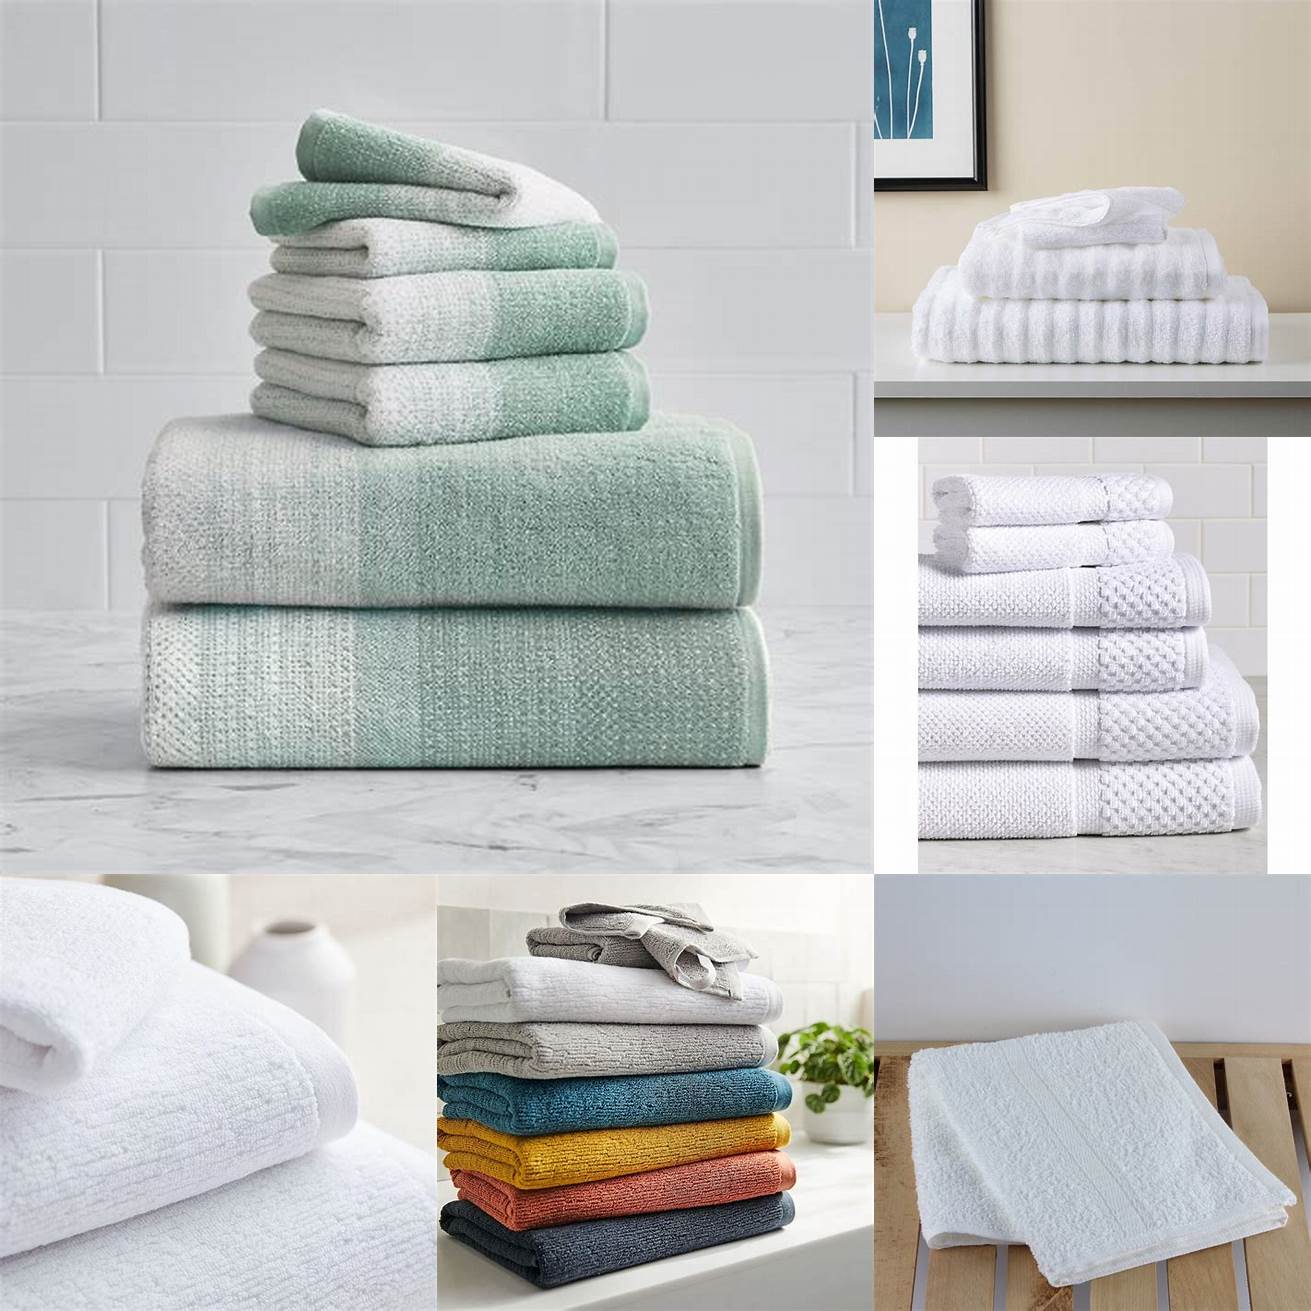 Textured white towels